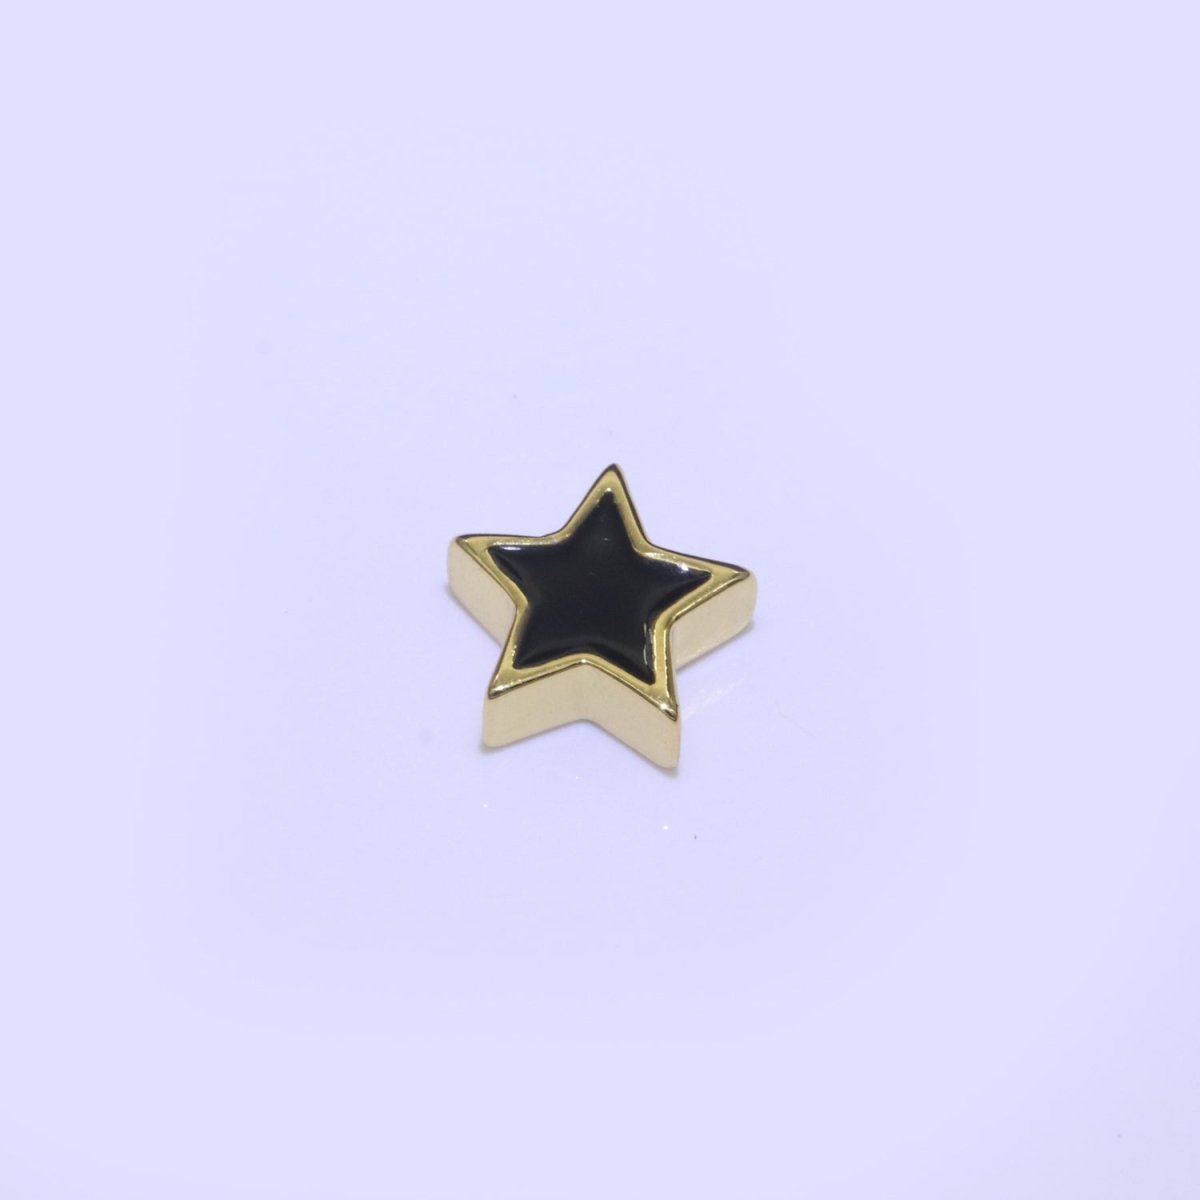 Dainty Colorful Star Spacer Beads, Green Black Pink Yellow Purple Teal Star beads for Necklace Bracelet Component 10mm Gold Beads B-593 to B602 - DLUXCA